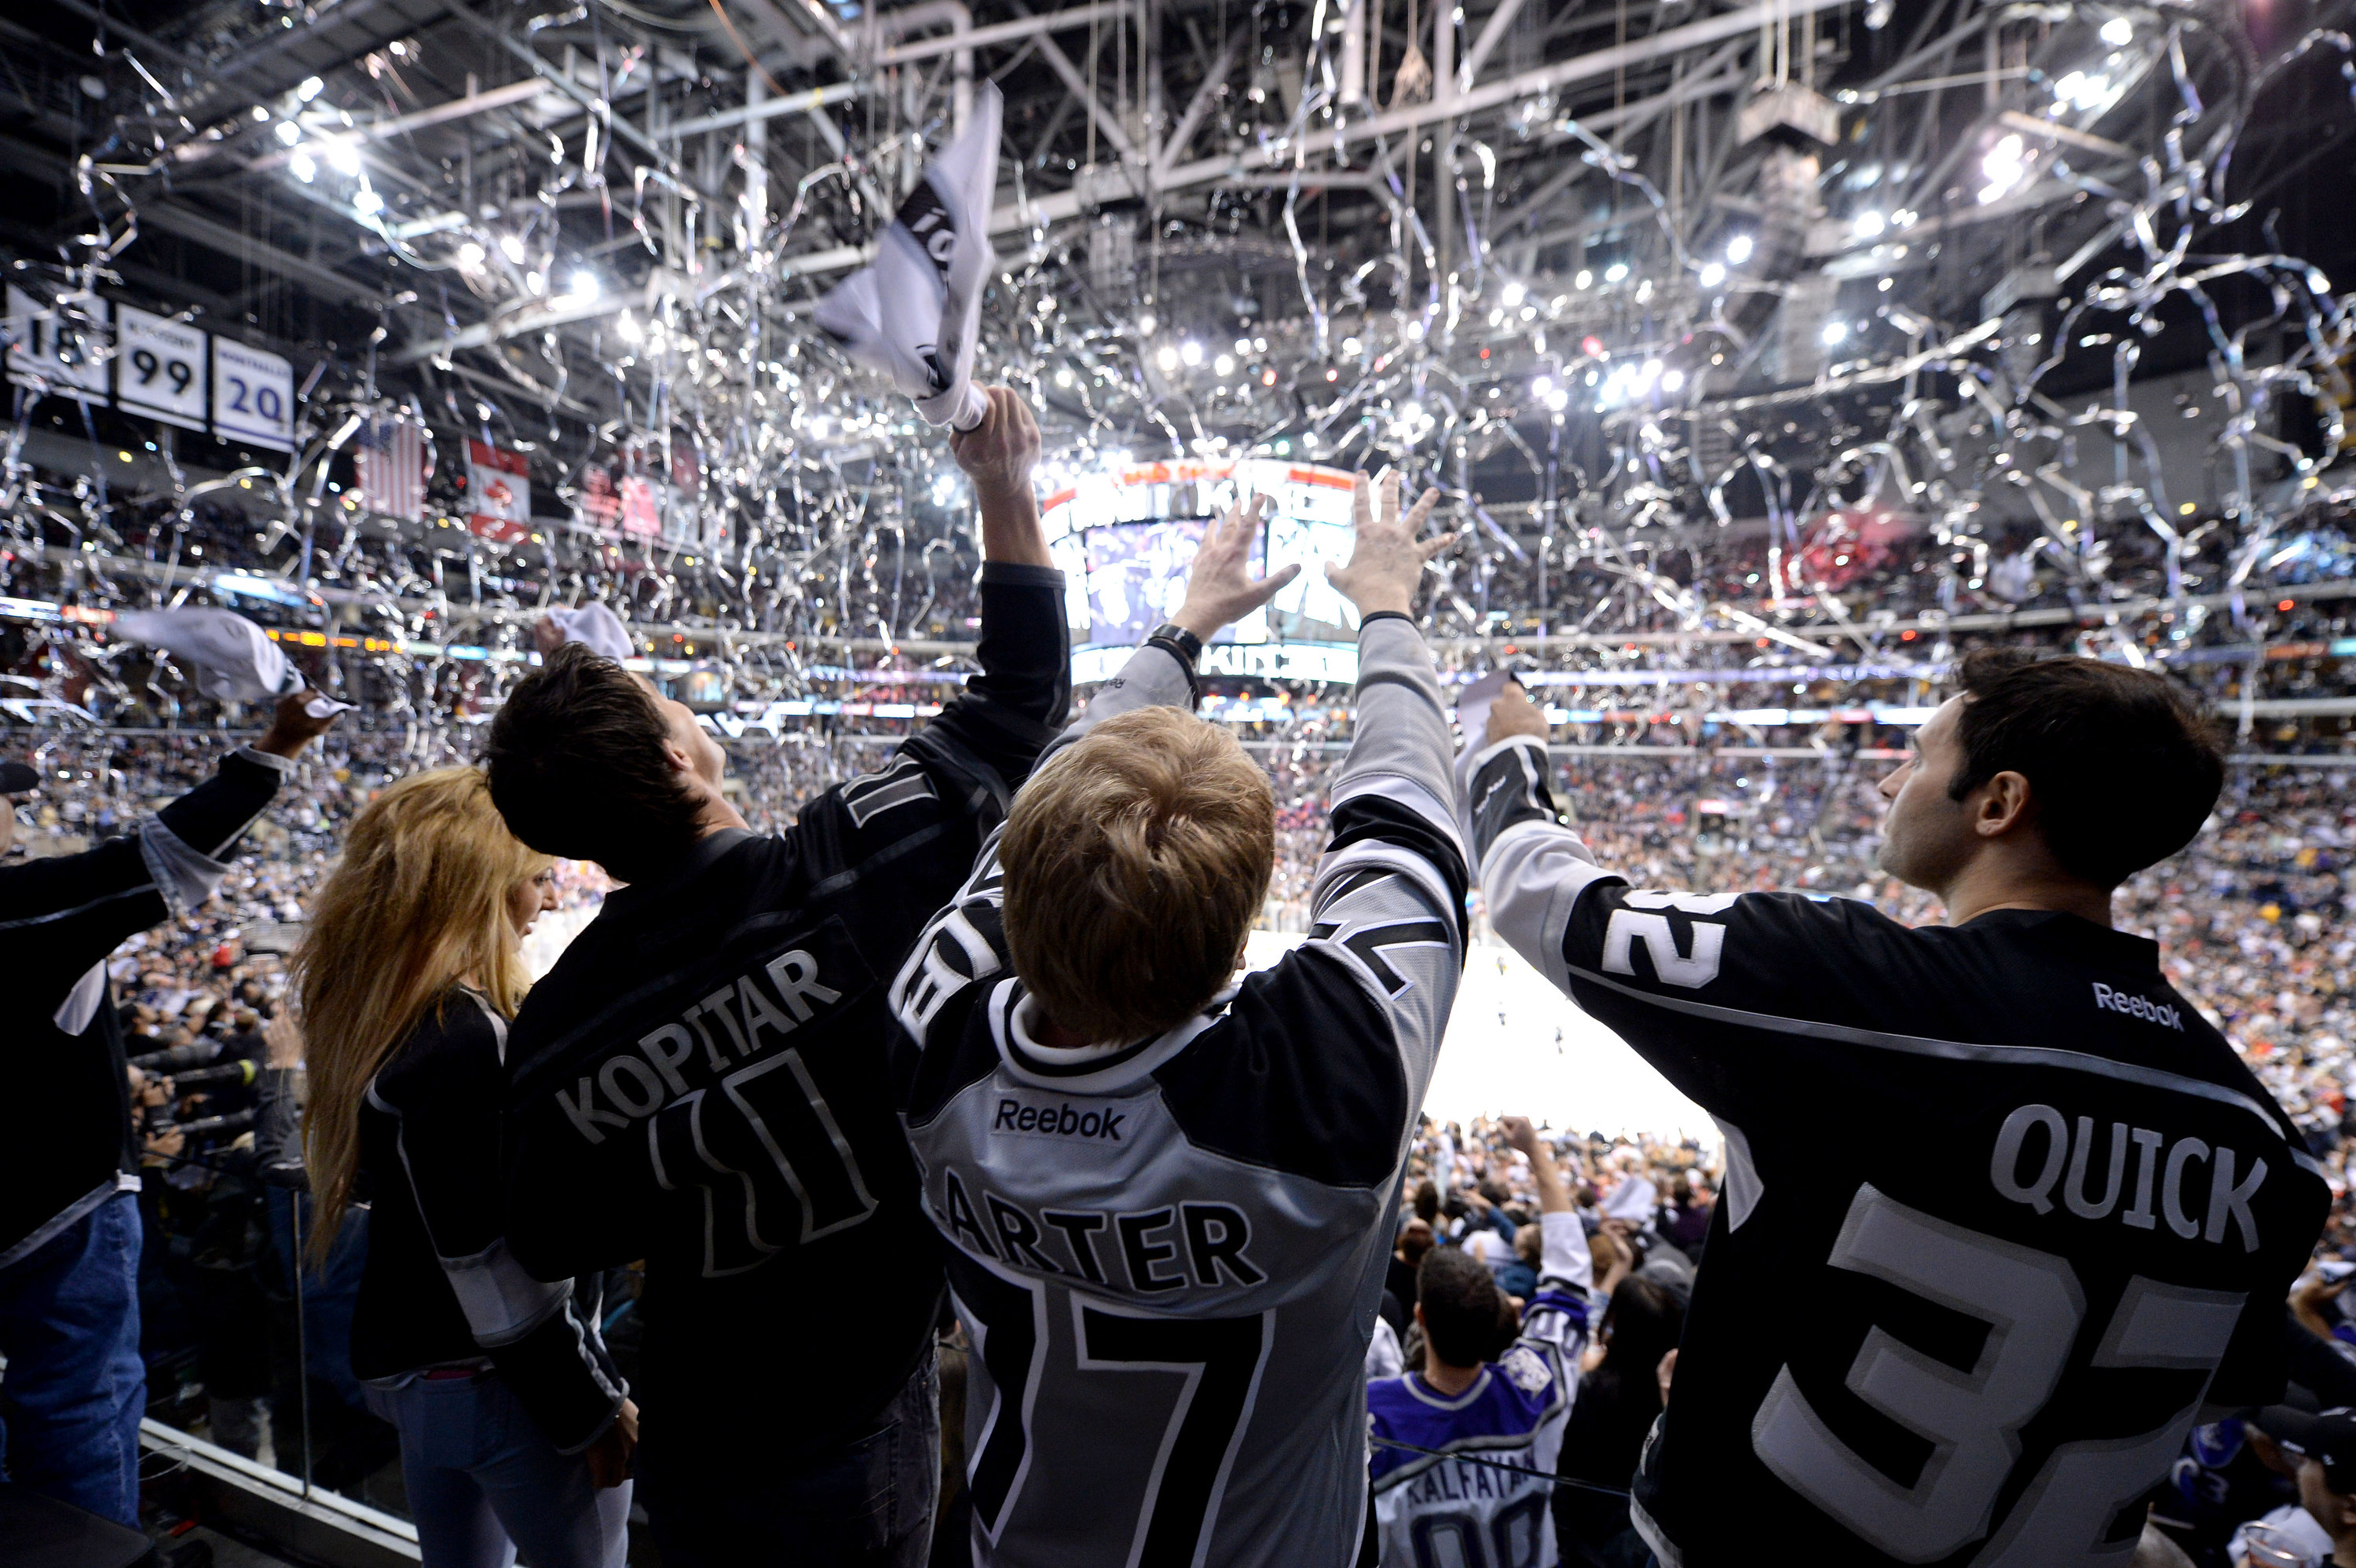 Where Can I Find LA Kings Tickets?